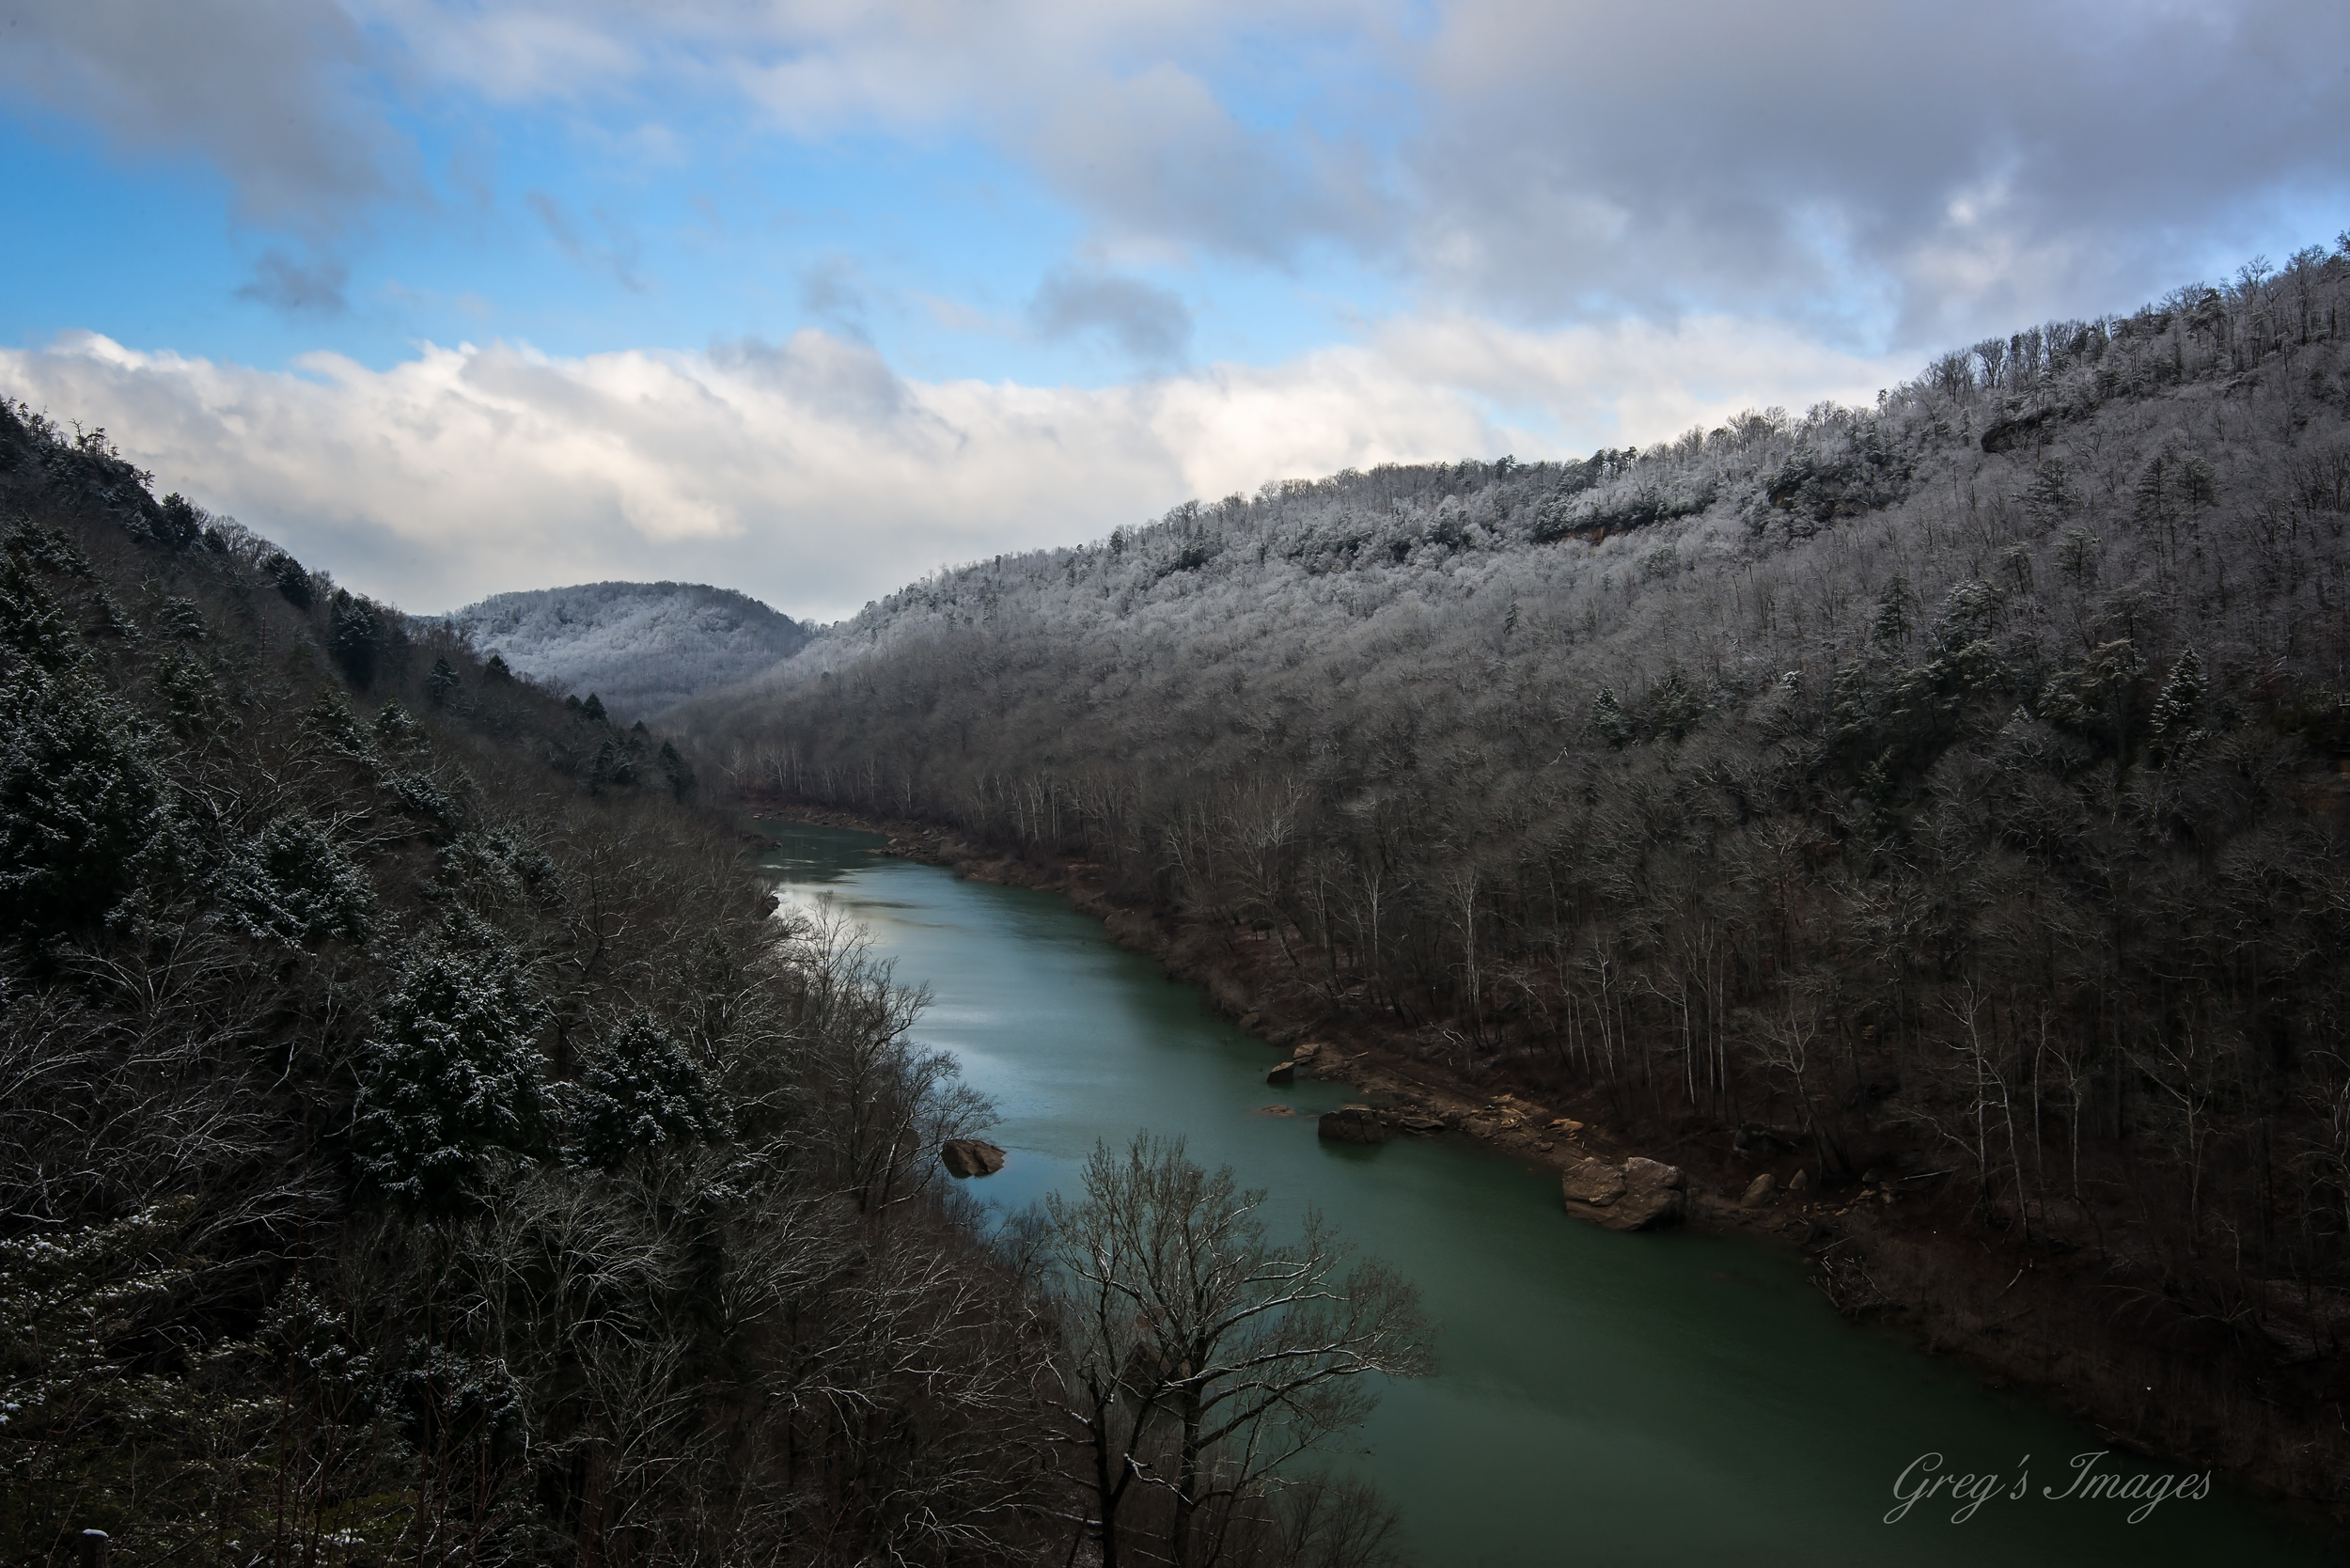 Snow-capped ridges along the South Fork River as seen from Yahoo Overlook.